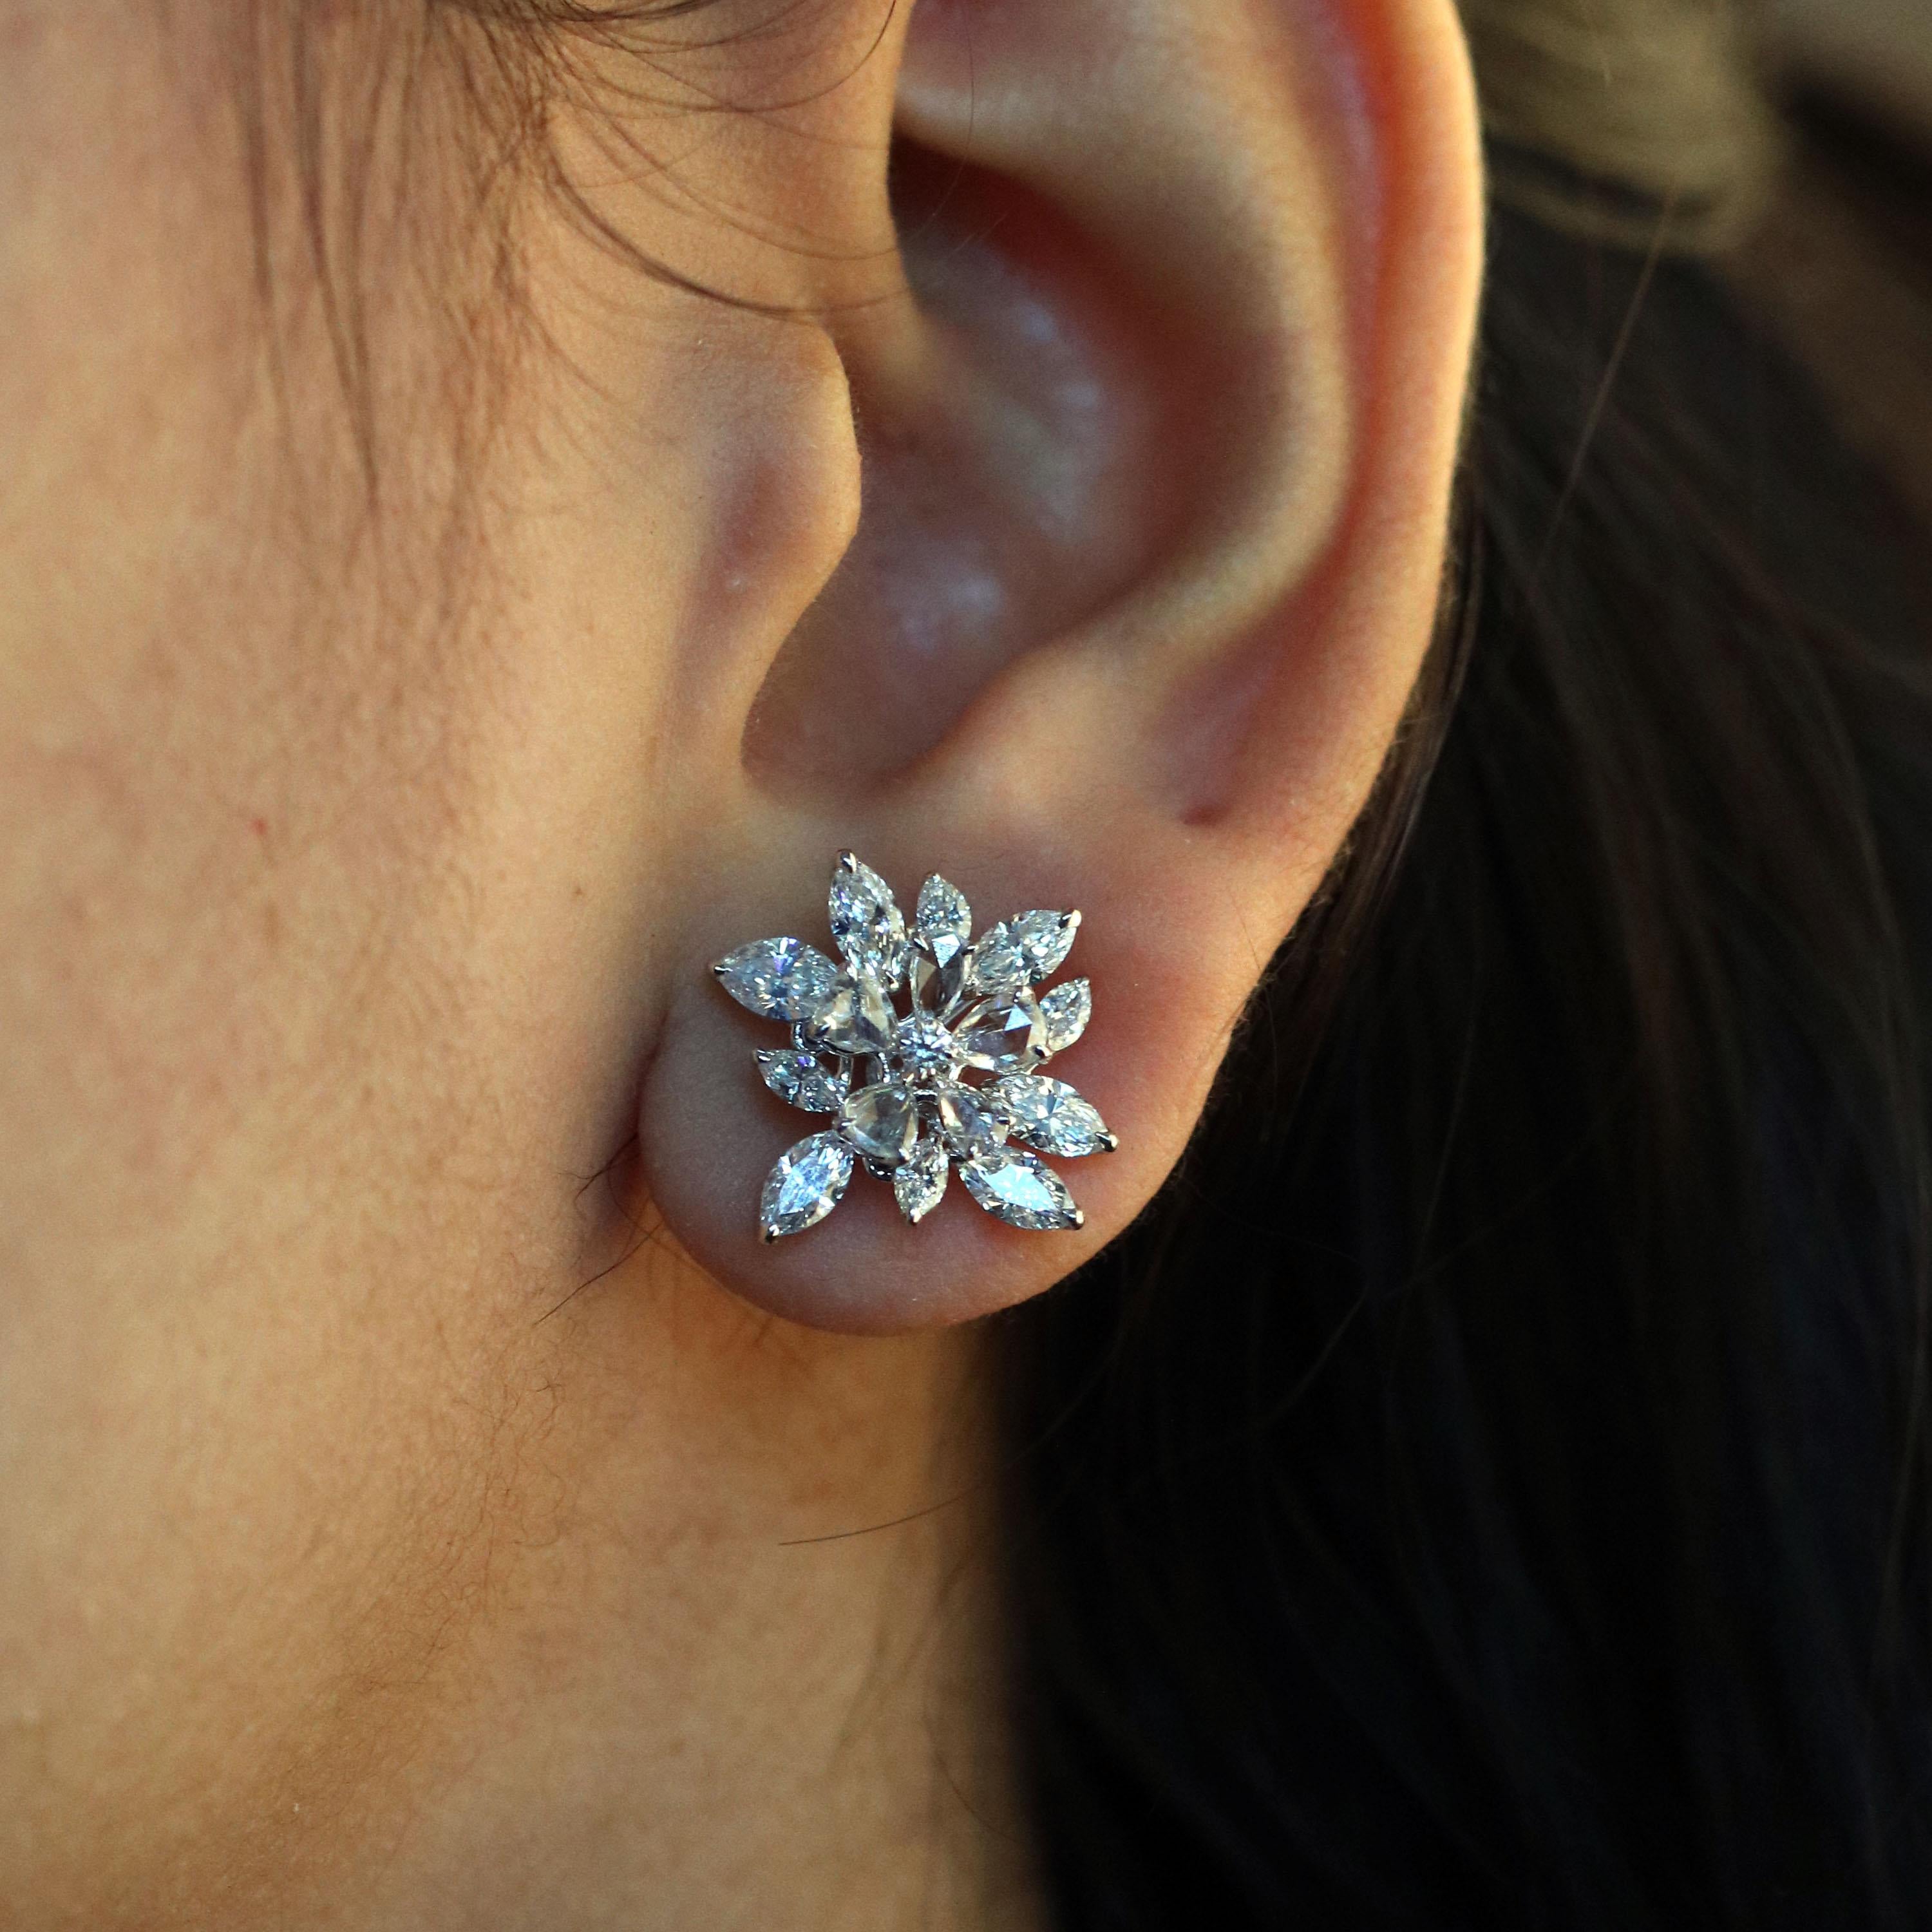 Gross Weight: 6.47 Grams
Diamond Weight: 3.01 cts
IGI Certification can be done on Request

Video of the product can be shared on request.

Delicate and desirable, these snowflake stud earrings are timelessly elegant pieces of jewelry that work with